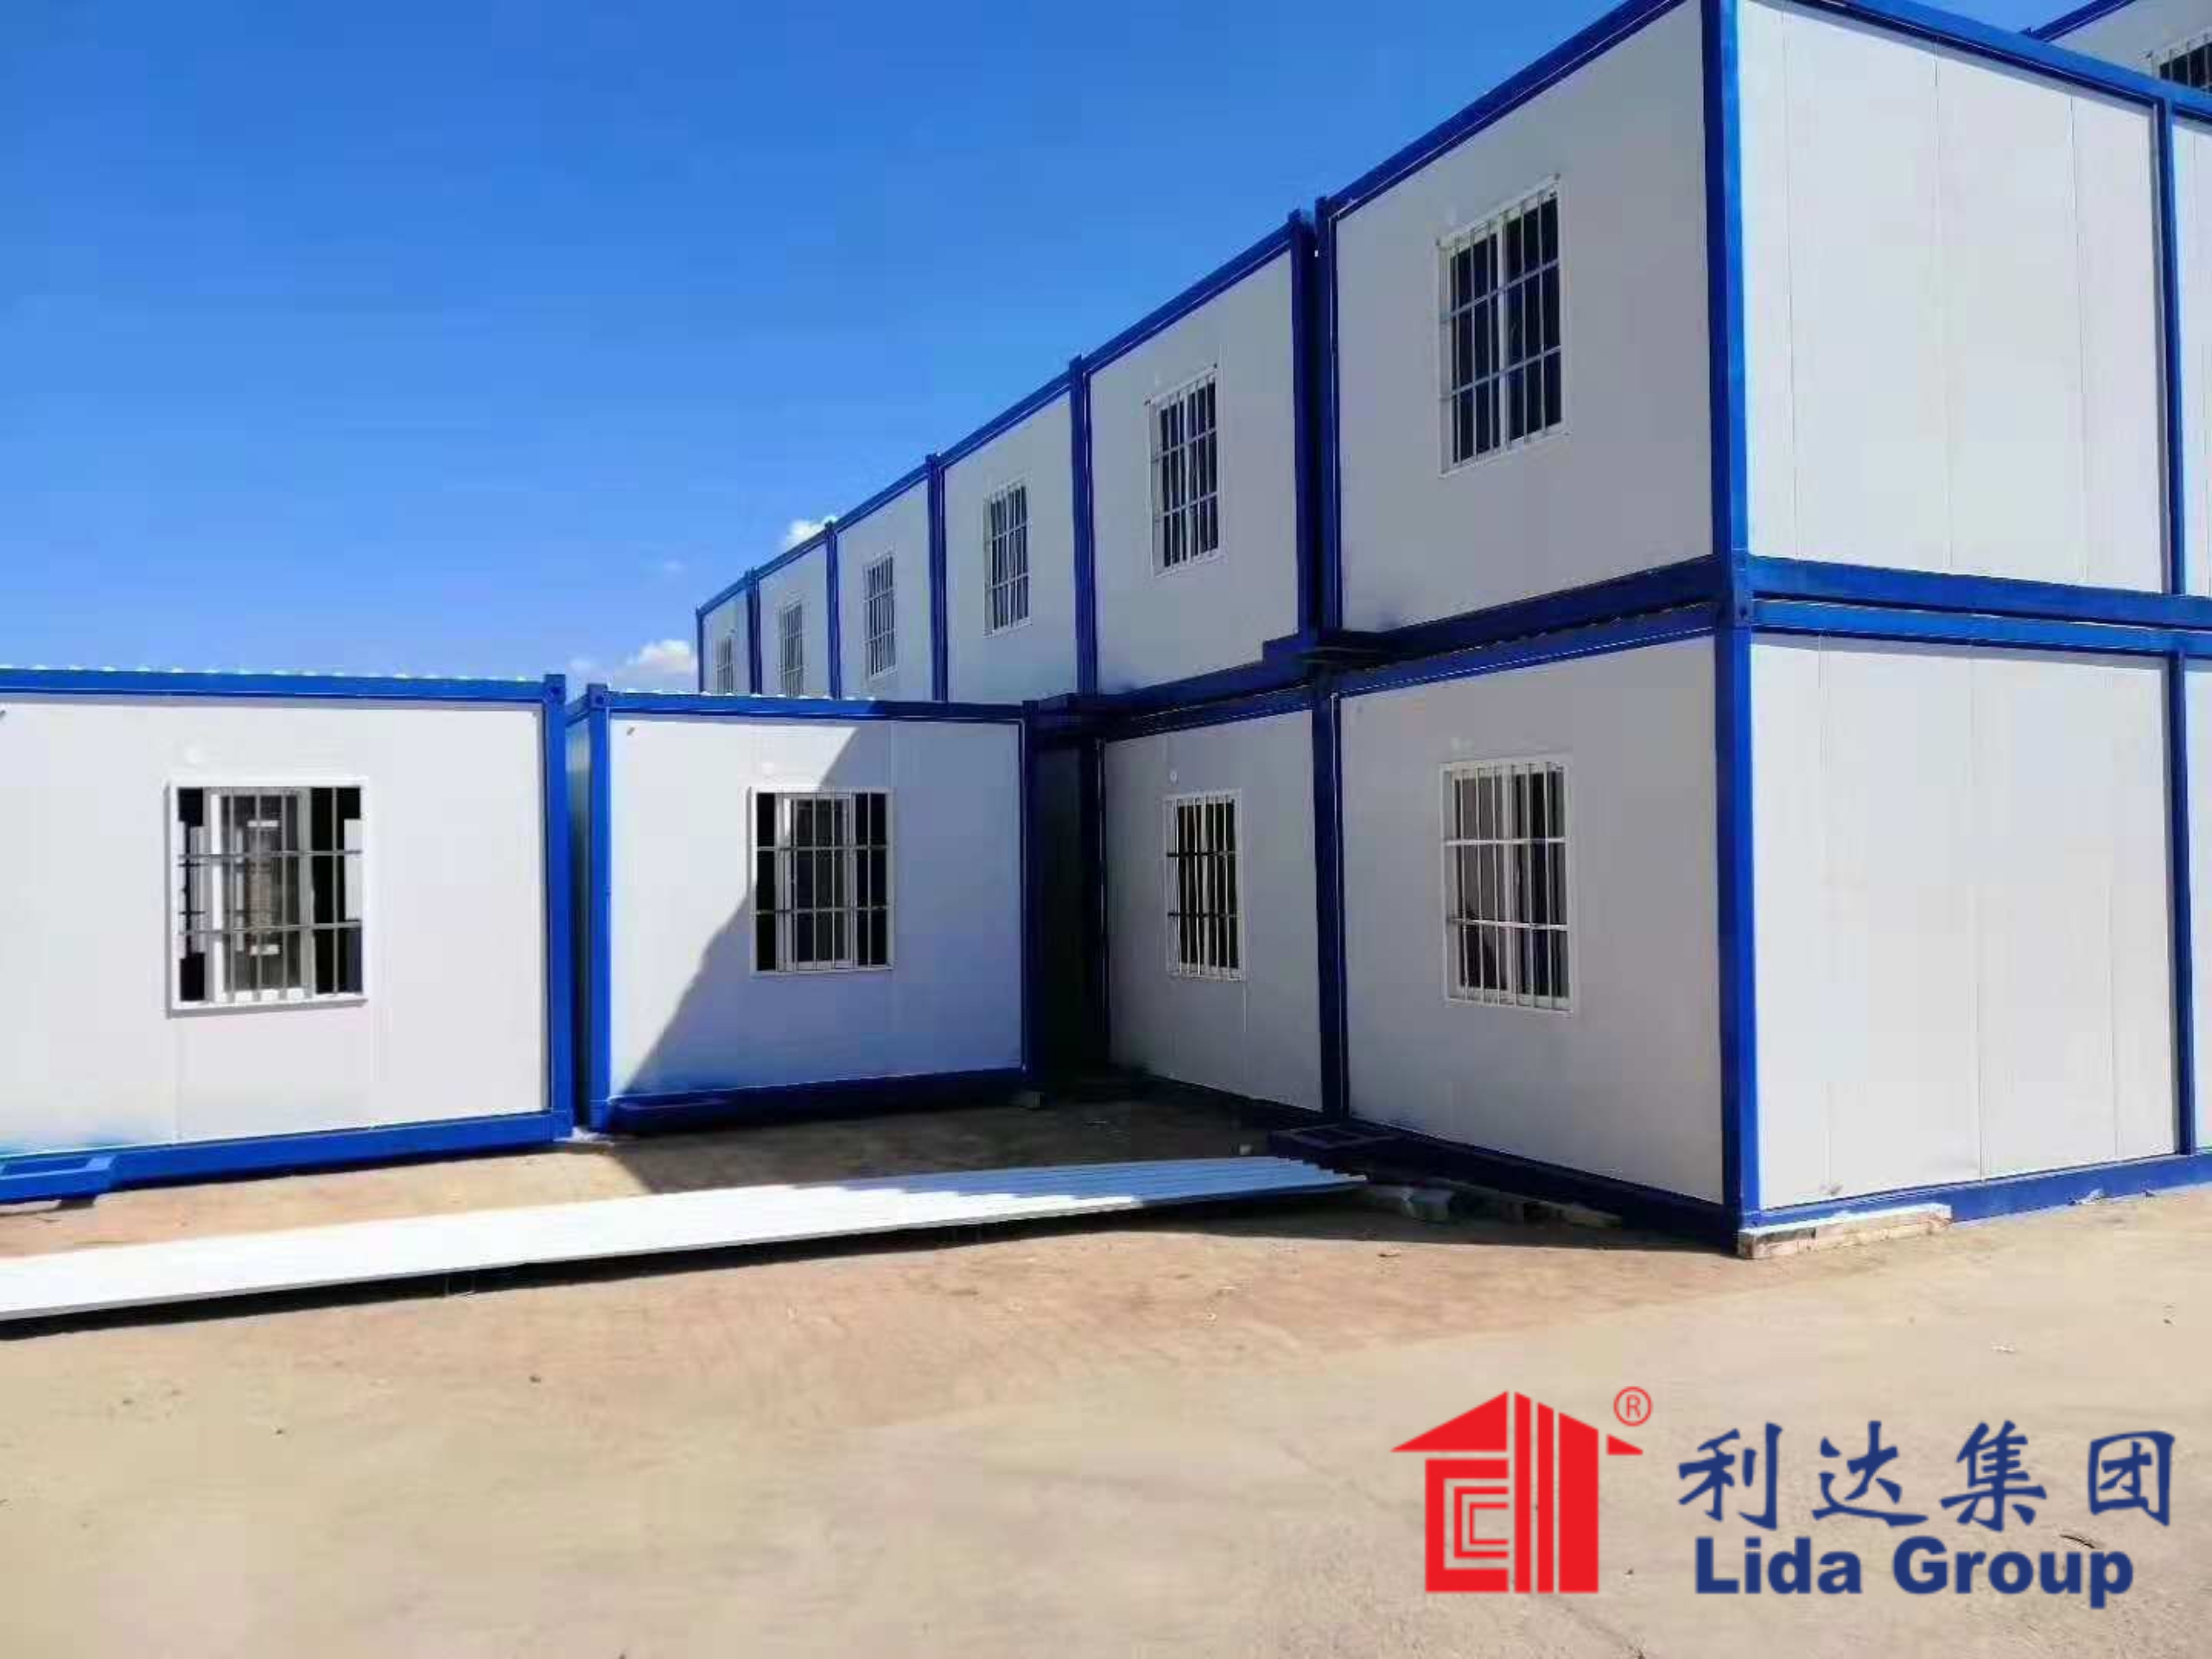 City launches pilot project to construct durable and affordable temporary schools from recycled shipping container classrooms supplied by Lida Group to address overcrowding challenges.